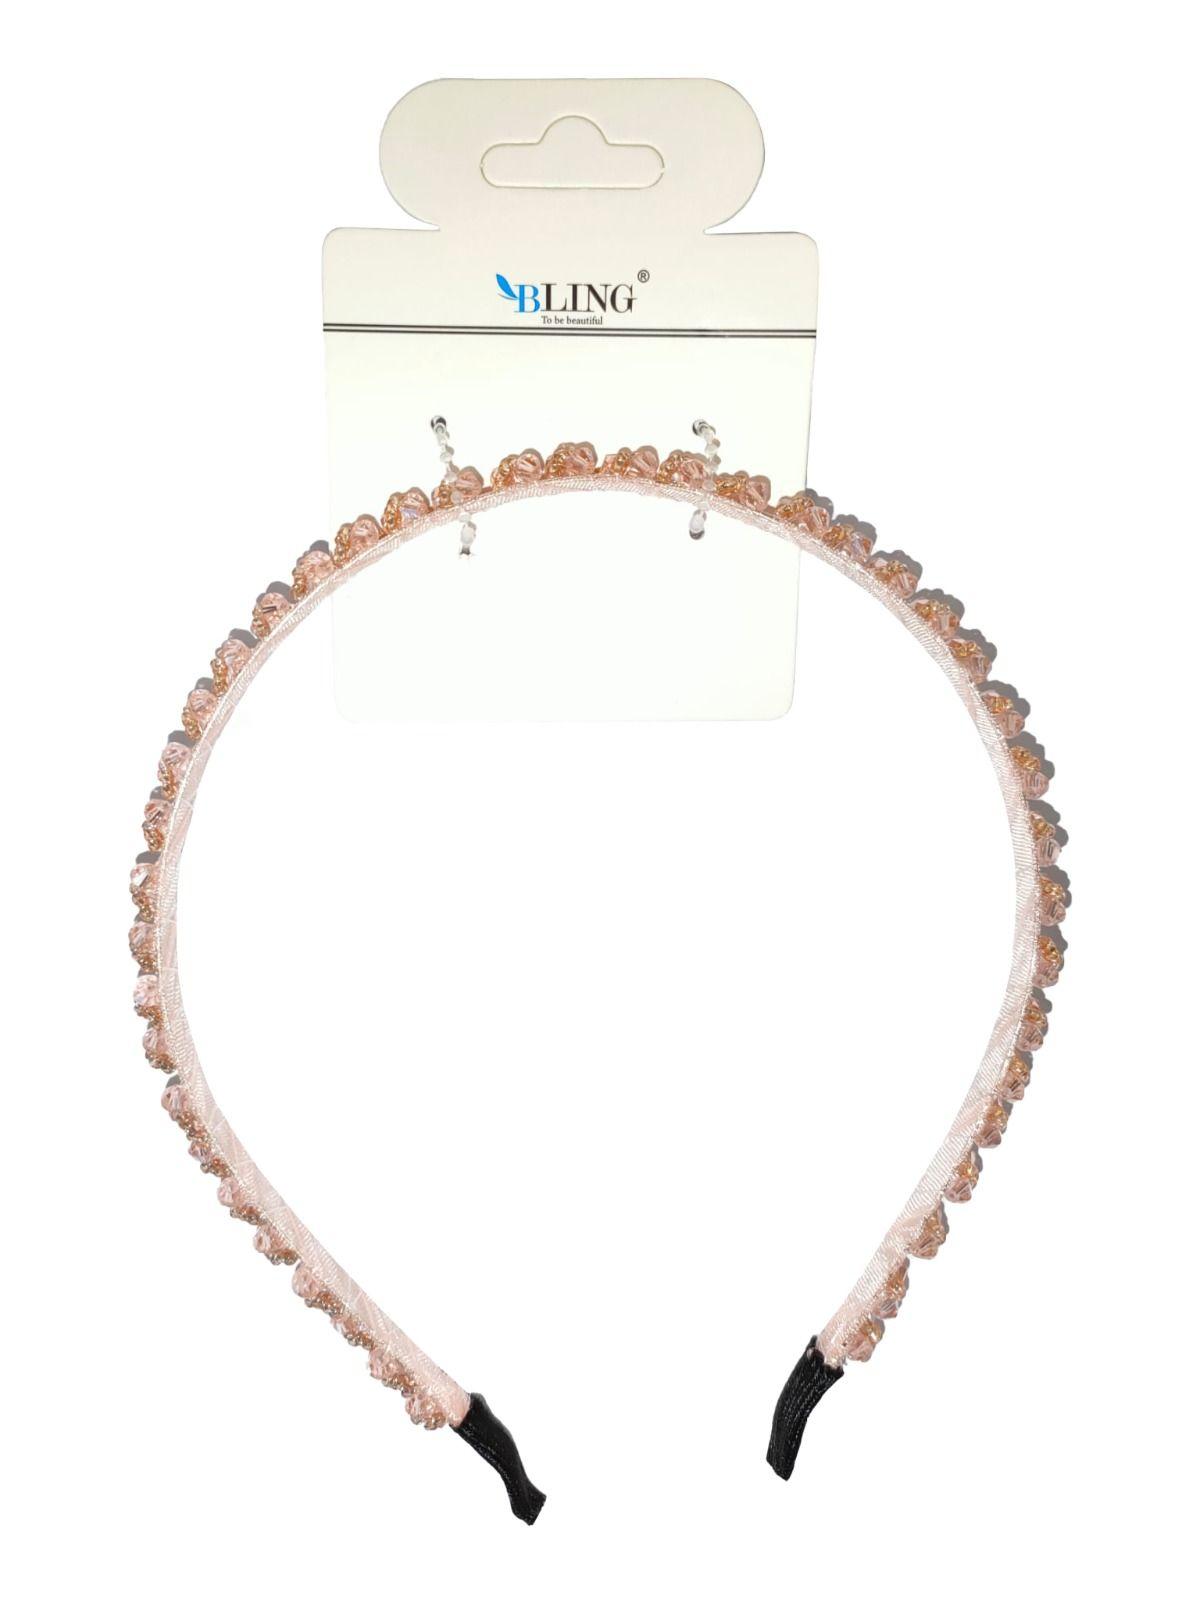 BLING diamond and gold braided hairband - light pink